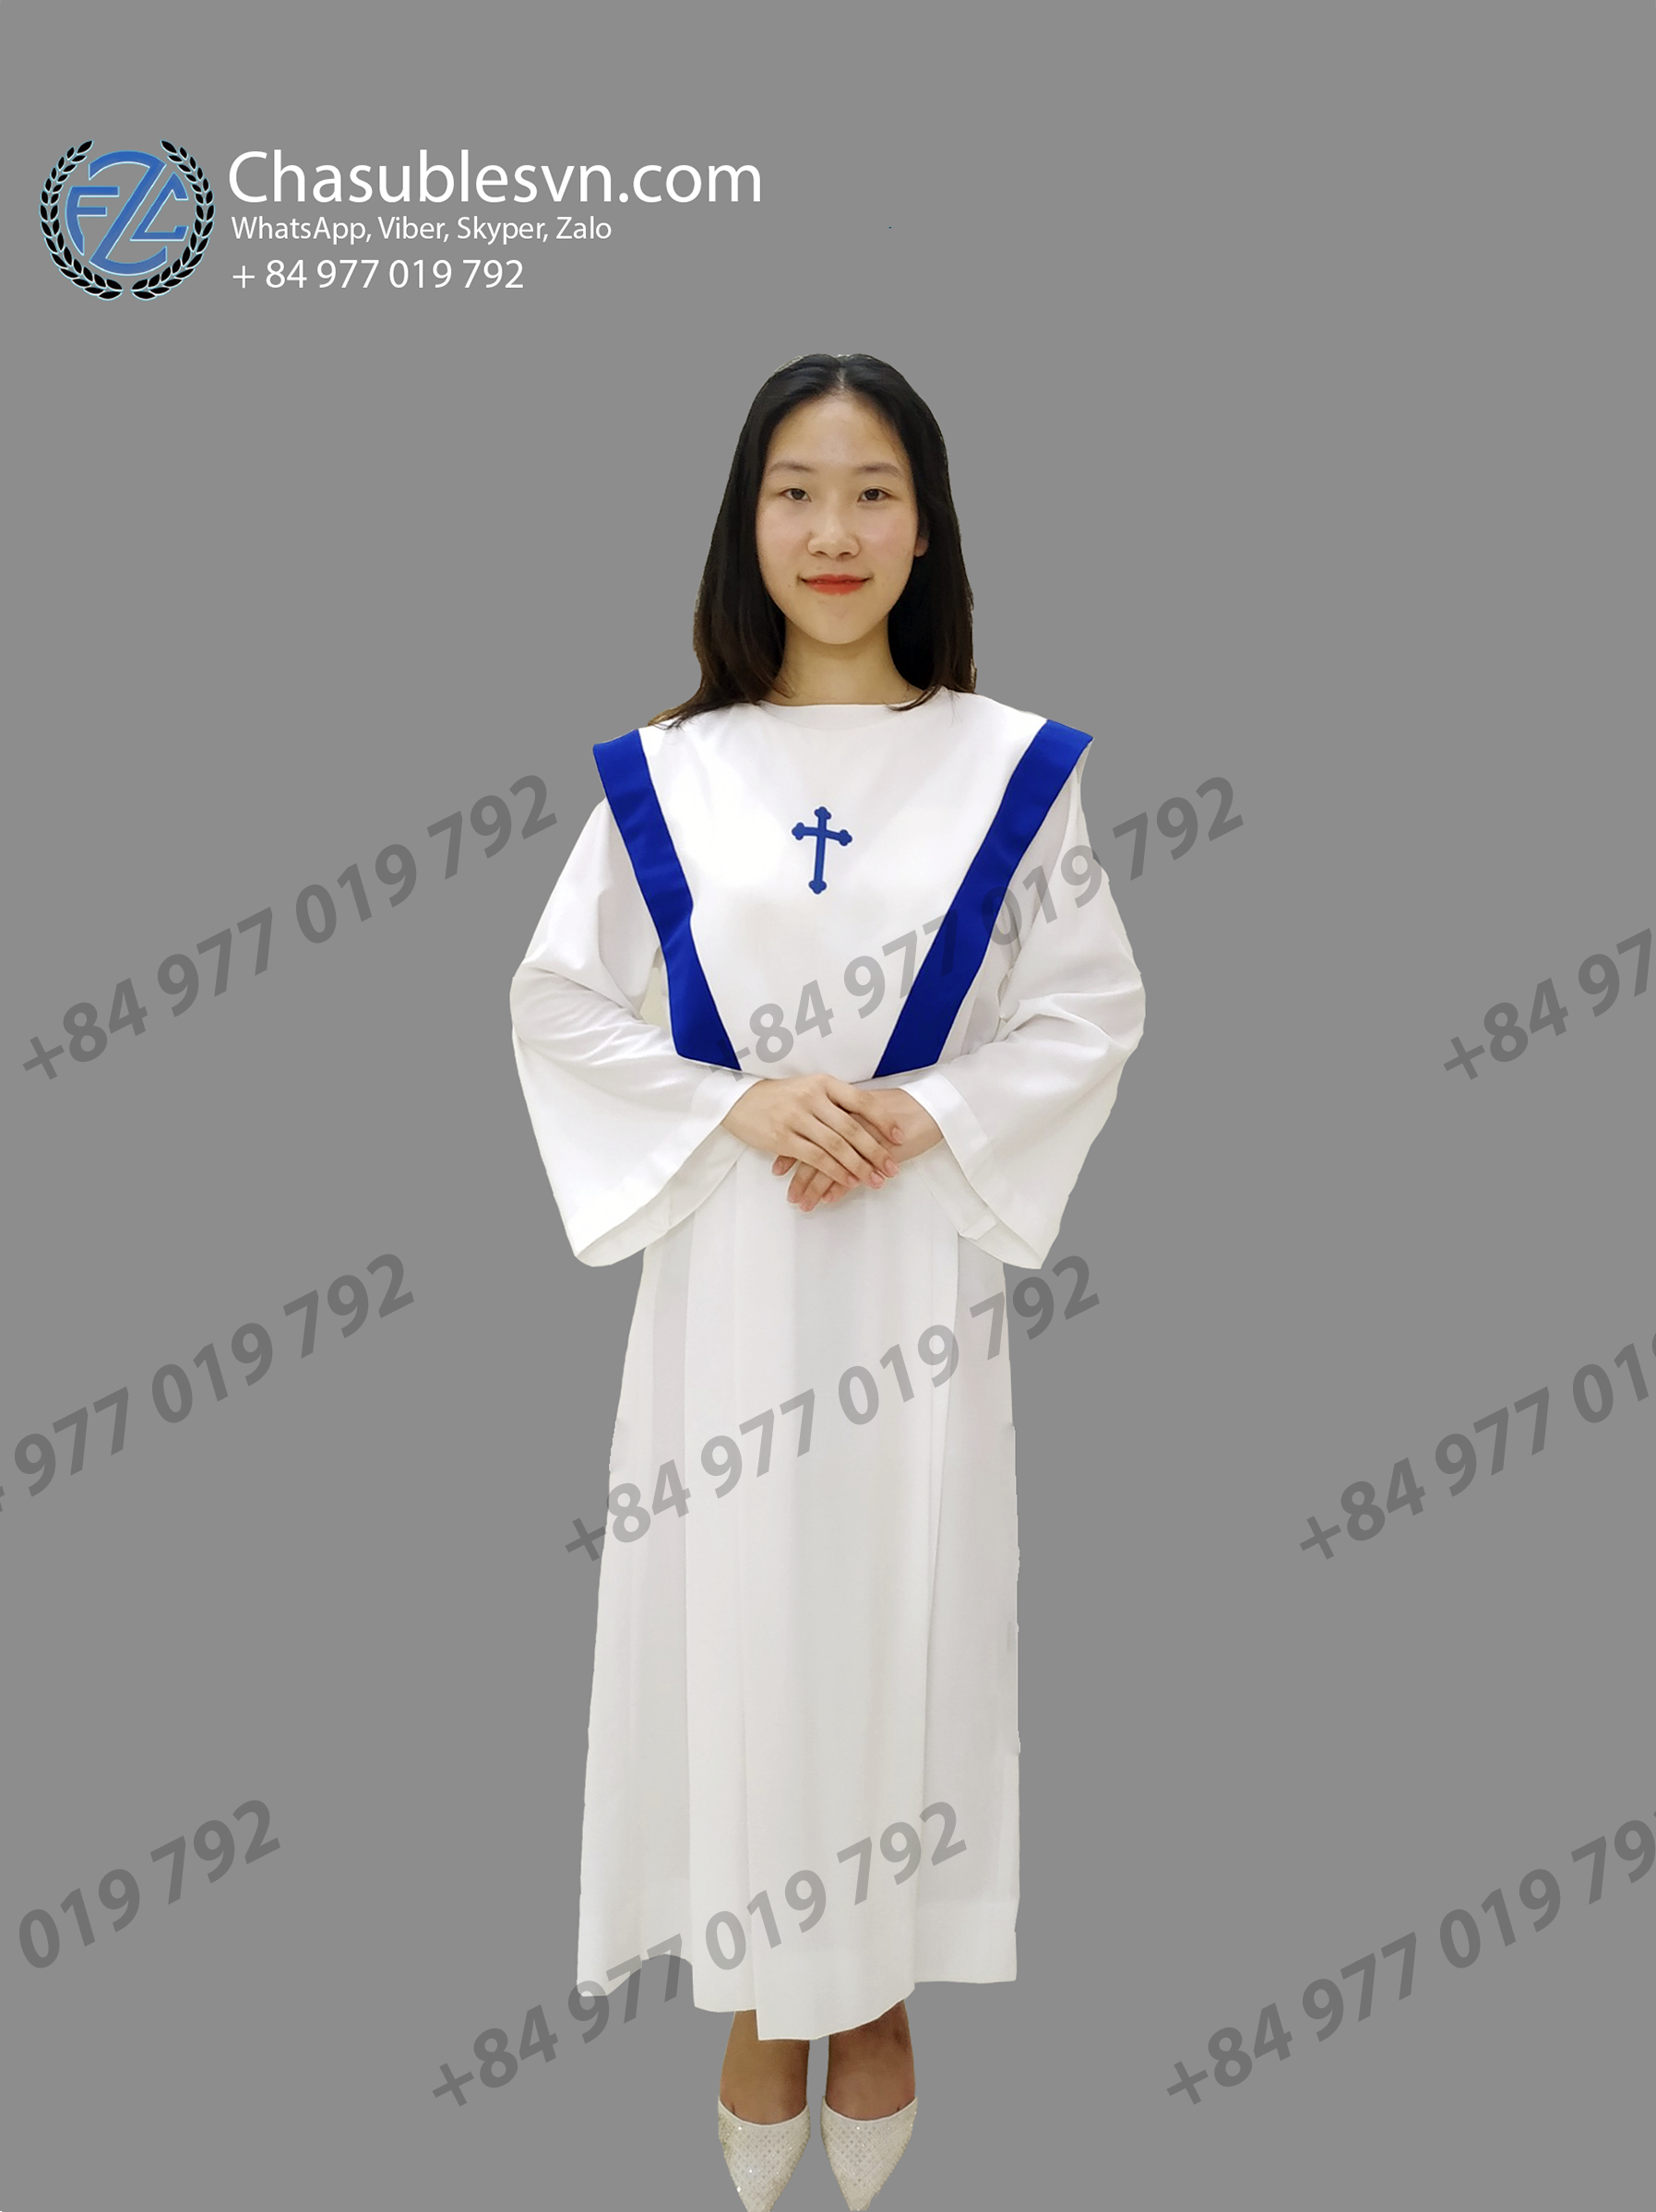 Graduation gowns, Court gowns, Church gowns - We deal on all types of  Graduation gowns, caps,hoods, choir gowns and all kinds of court attires.We  make our gowns with the best fabrics and